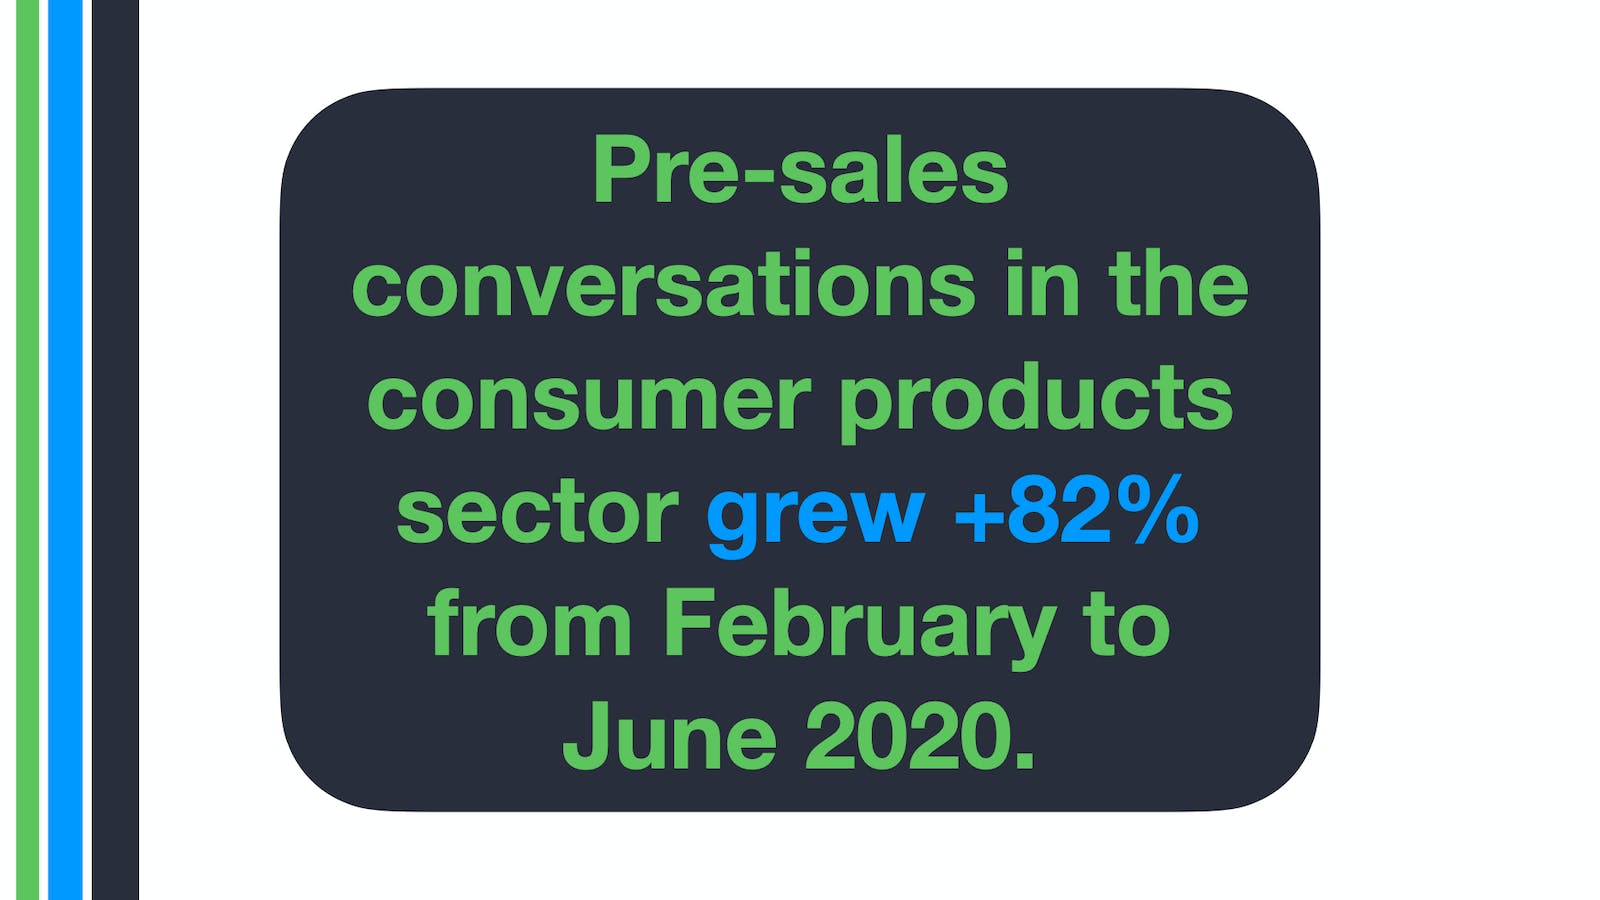 volume of conversations rise +82% in the consumer products sector.